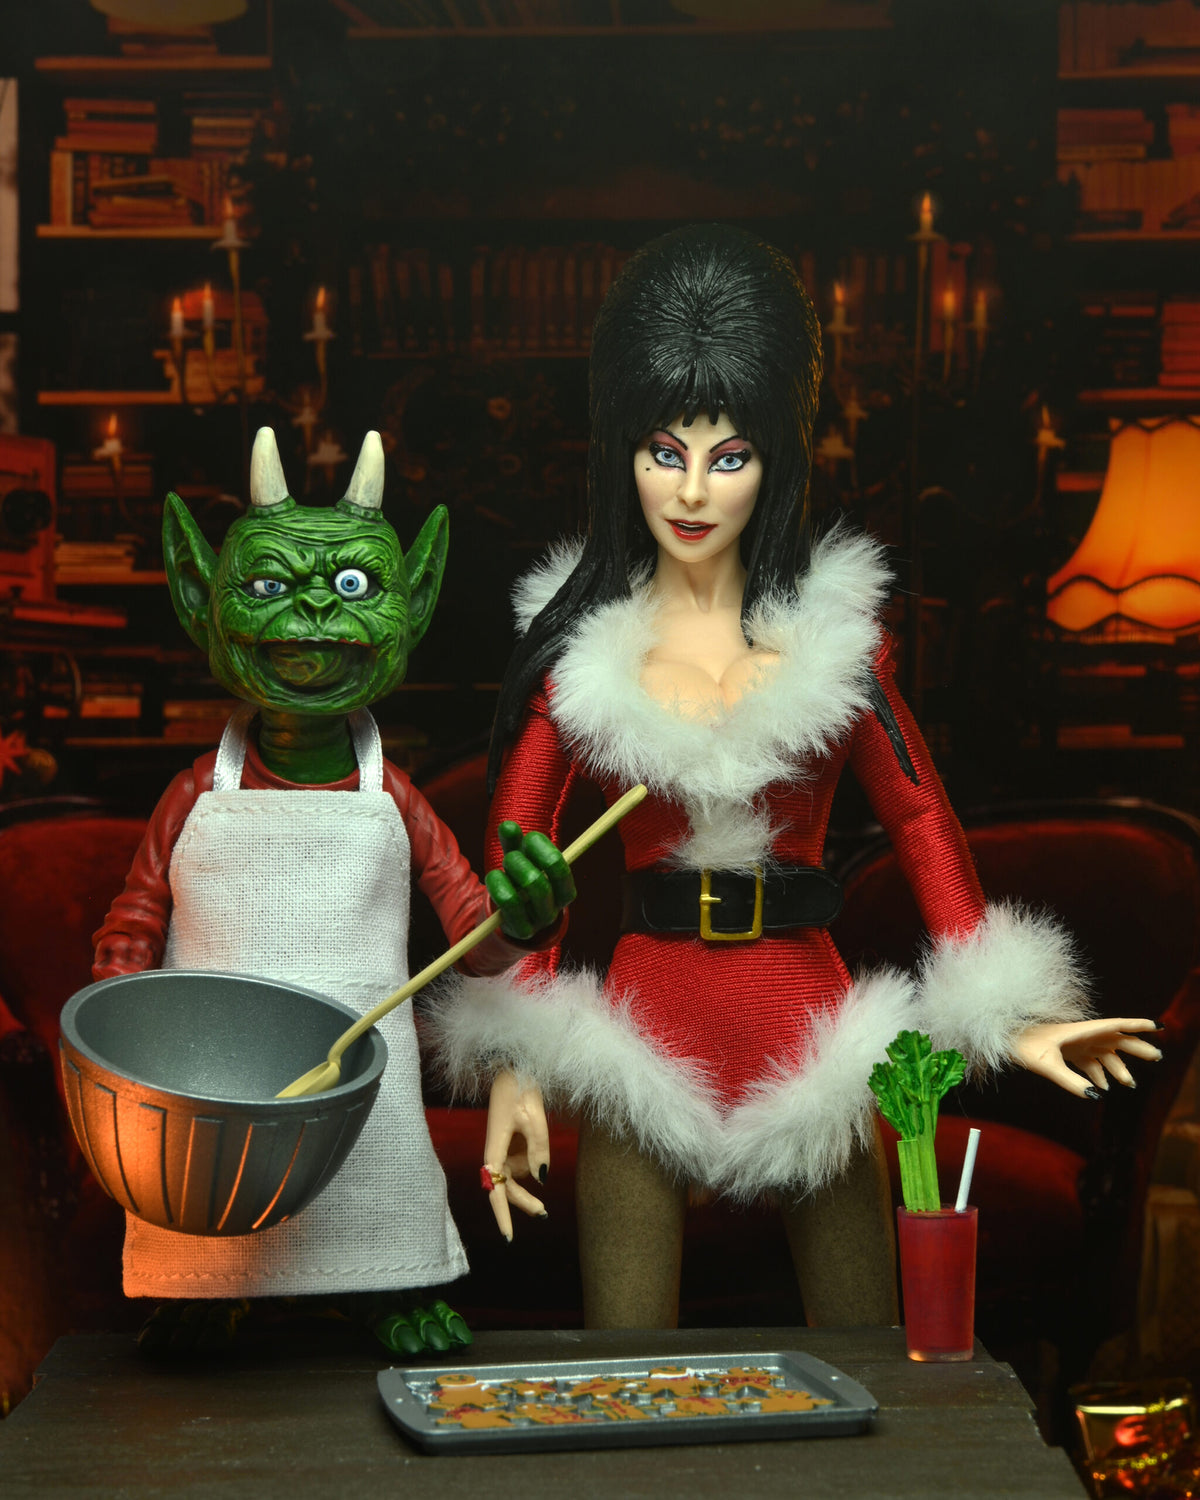 NECA - Elvira's Very Scary Xmas 8" Clothed Action Figure (Pre-Order Ship Date To Be Determined)